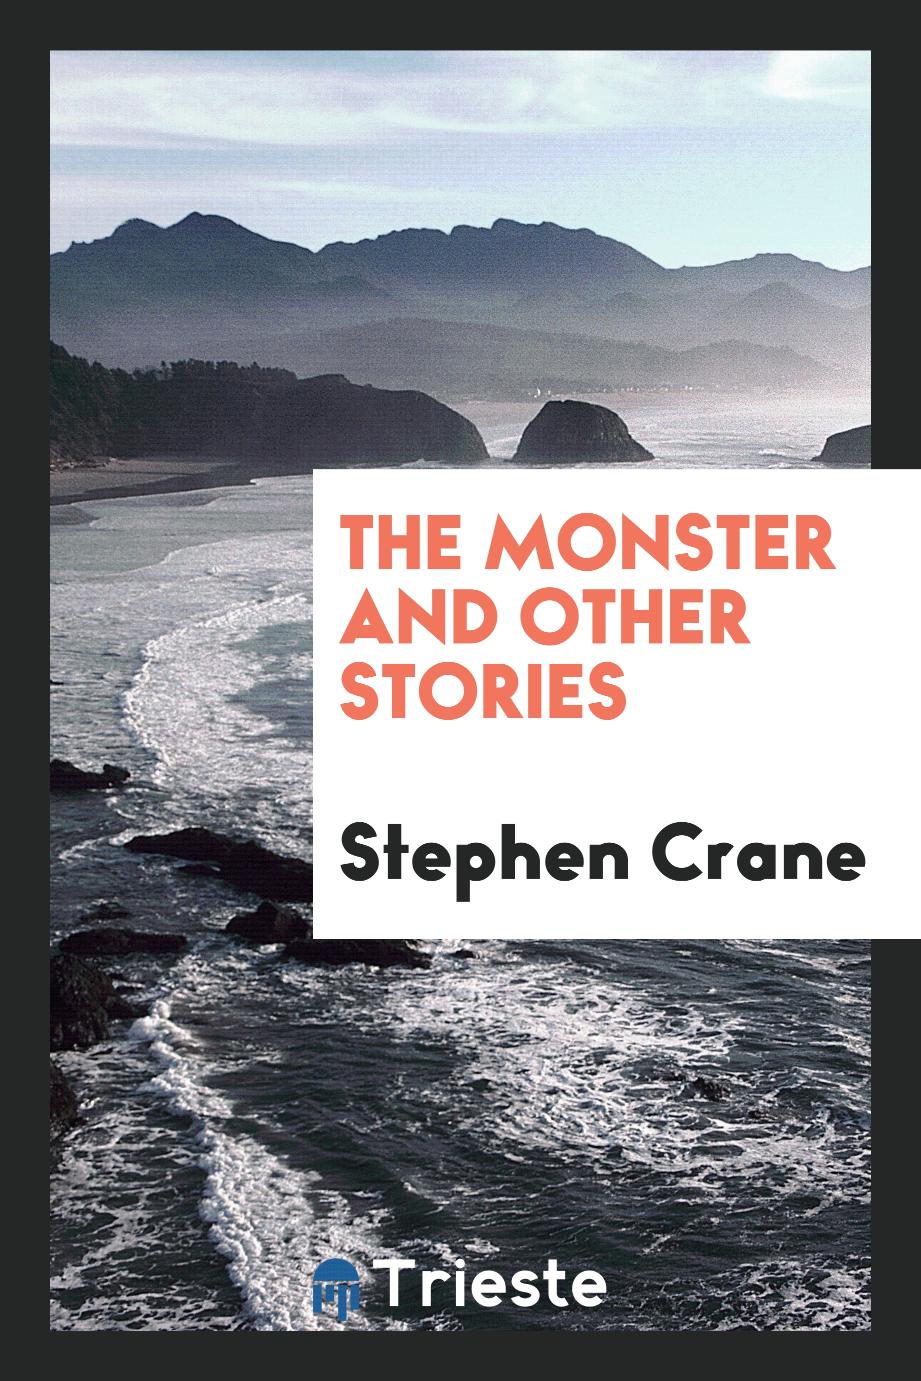 The monster and other stories